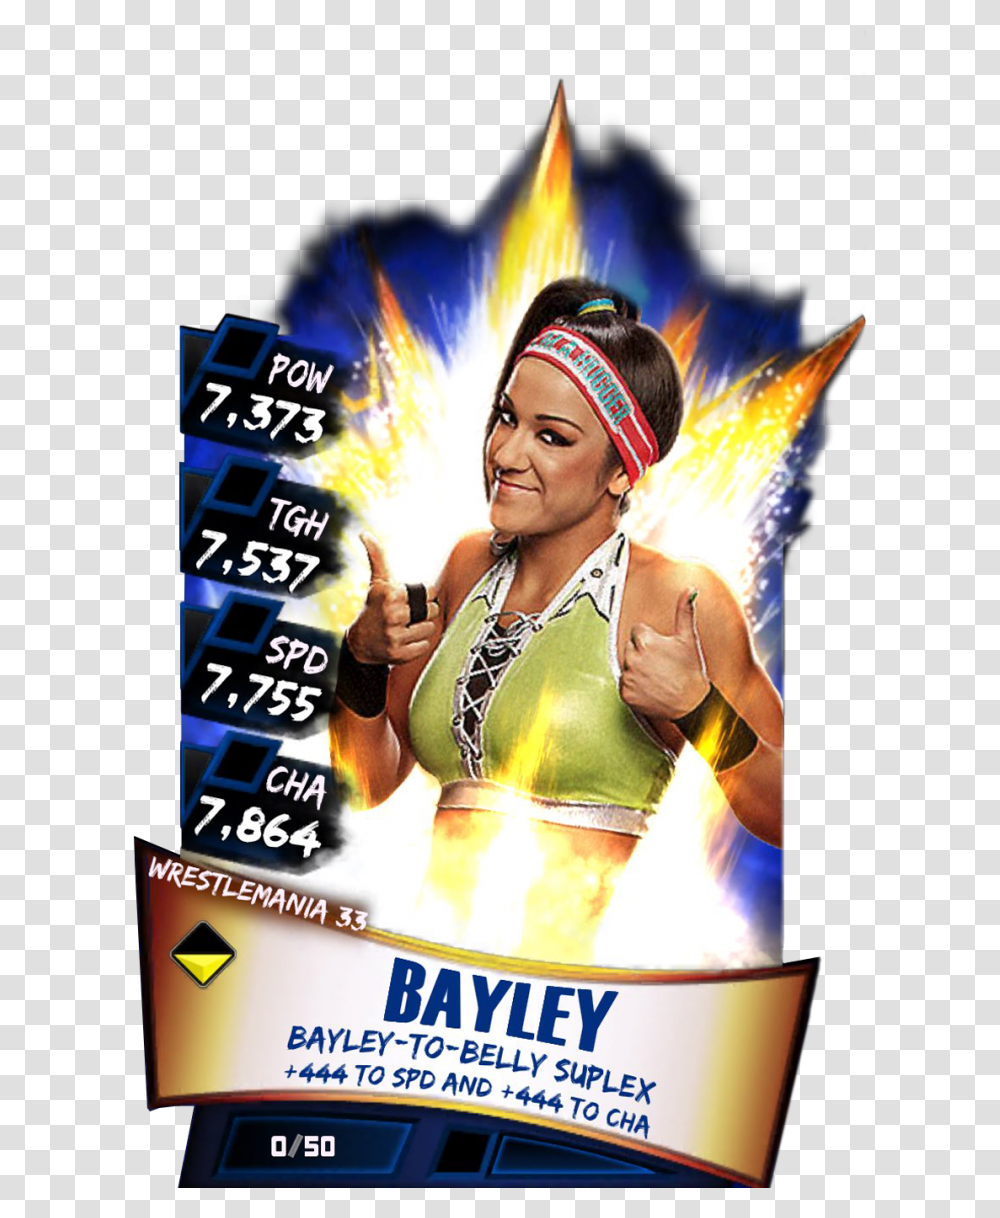 Bayley S3 14 Wrestlemania33 Alexa Bliss Wwe Supercard, Person, Poster, Advertisement, Flyer Transparent Png